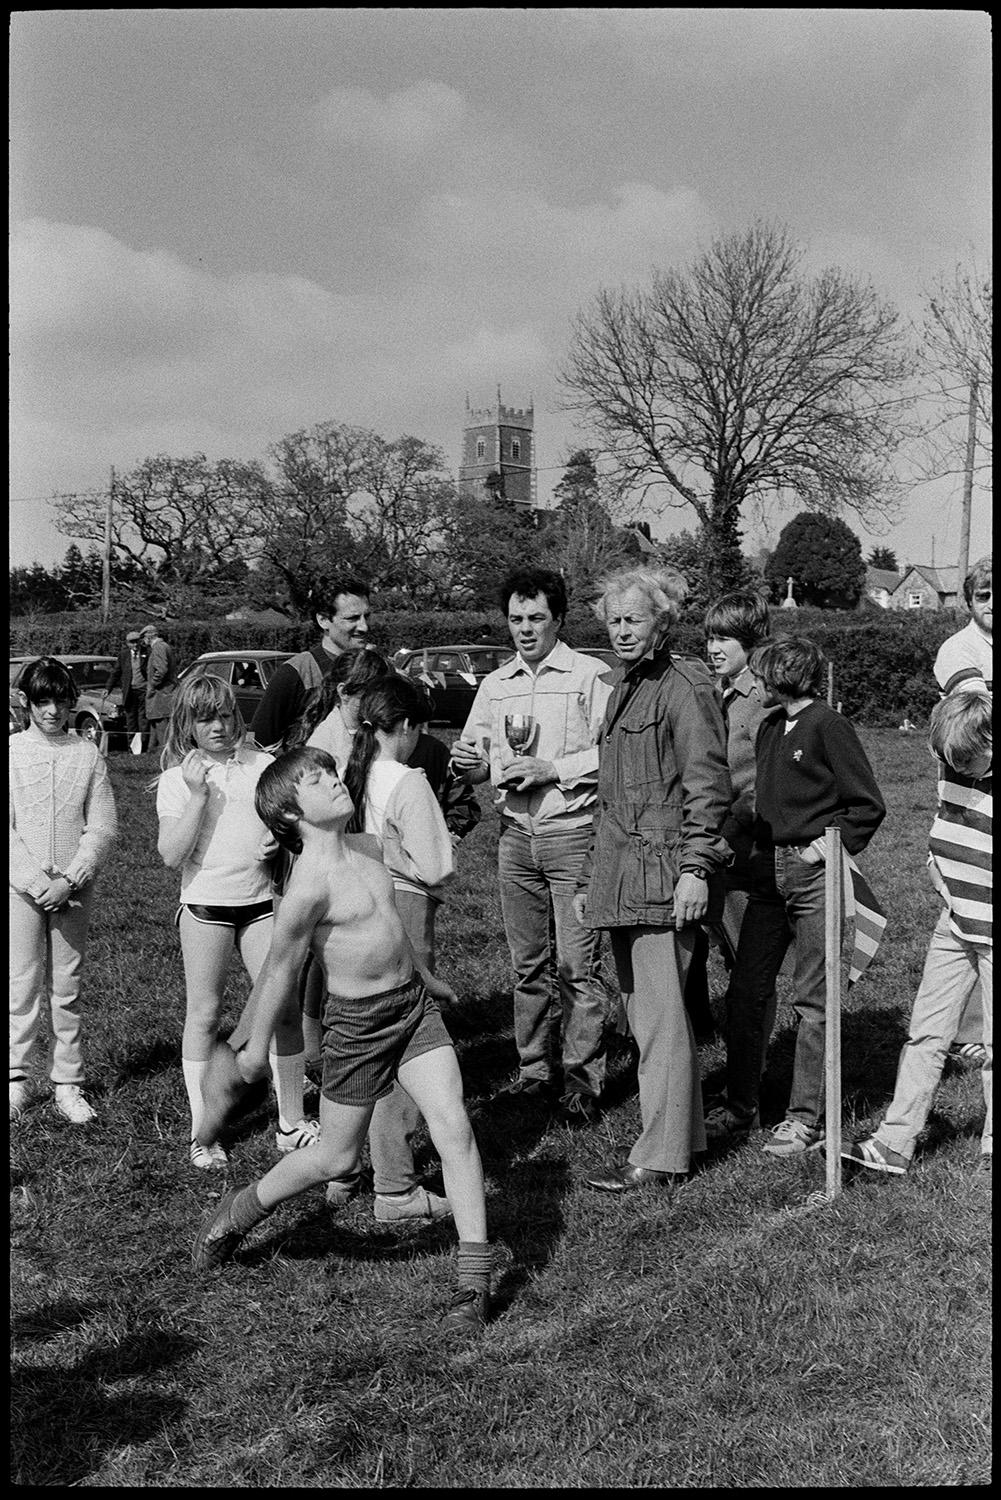 Club Day. Sports, running races, wellie throwing, prizes being given out.
[Children and adults gathered in a field for sports at Iddesleigh Club Day. A boy is about to throw a wellie. Iddesleigh church tower is visible in the background.]